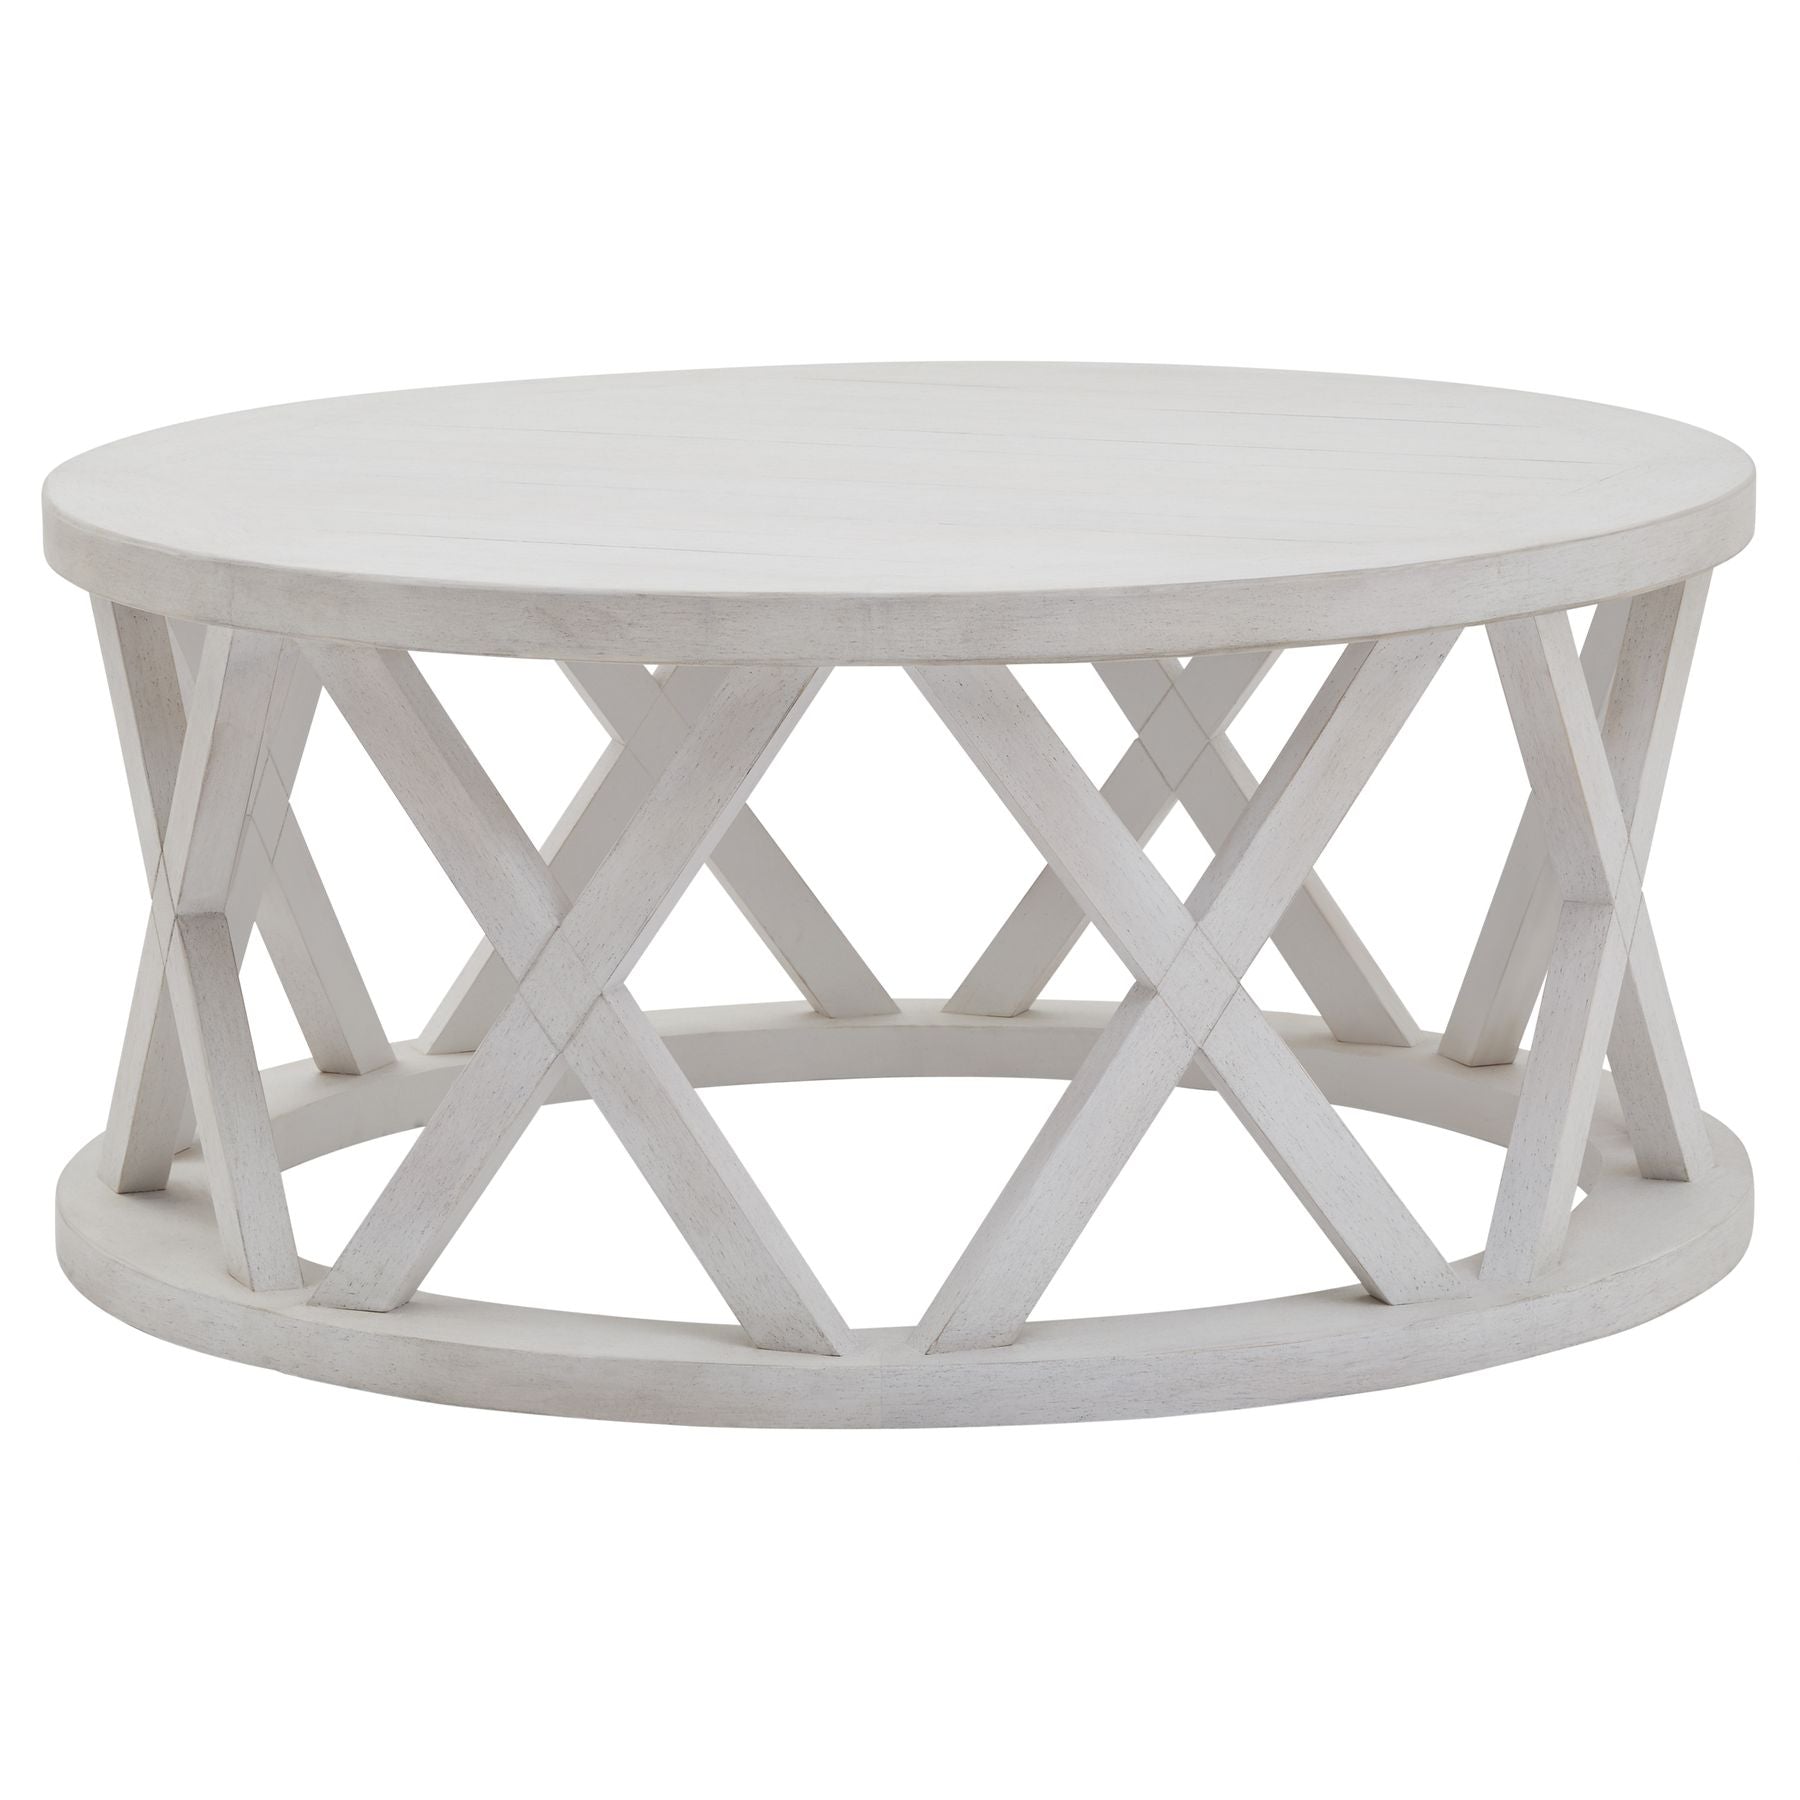 View Stamford Plank Collection Round Coffee Table information